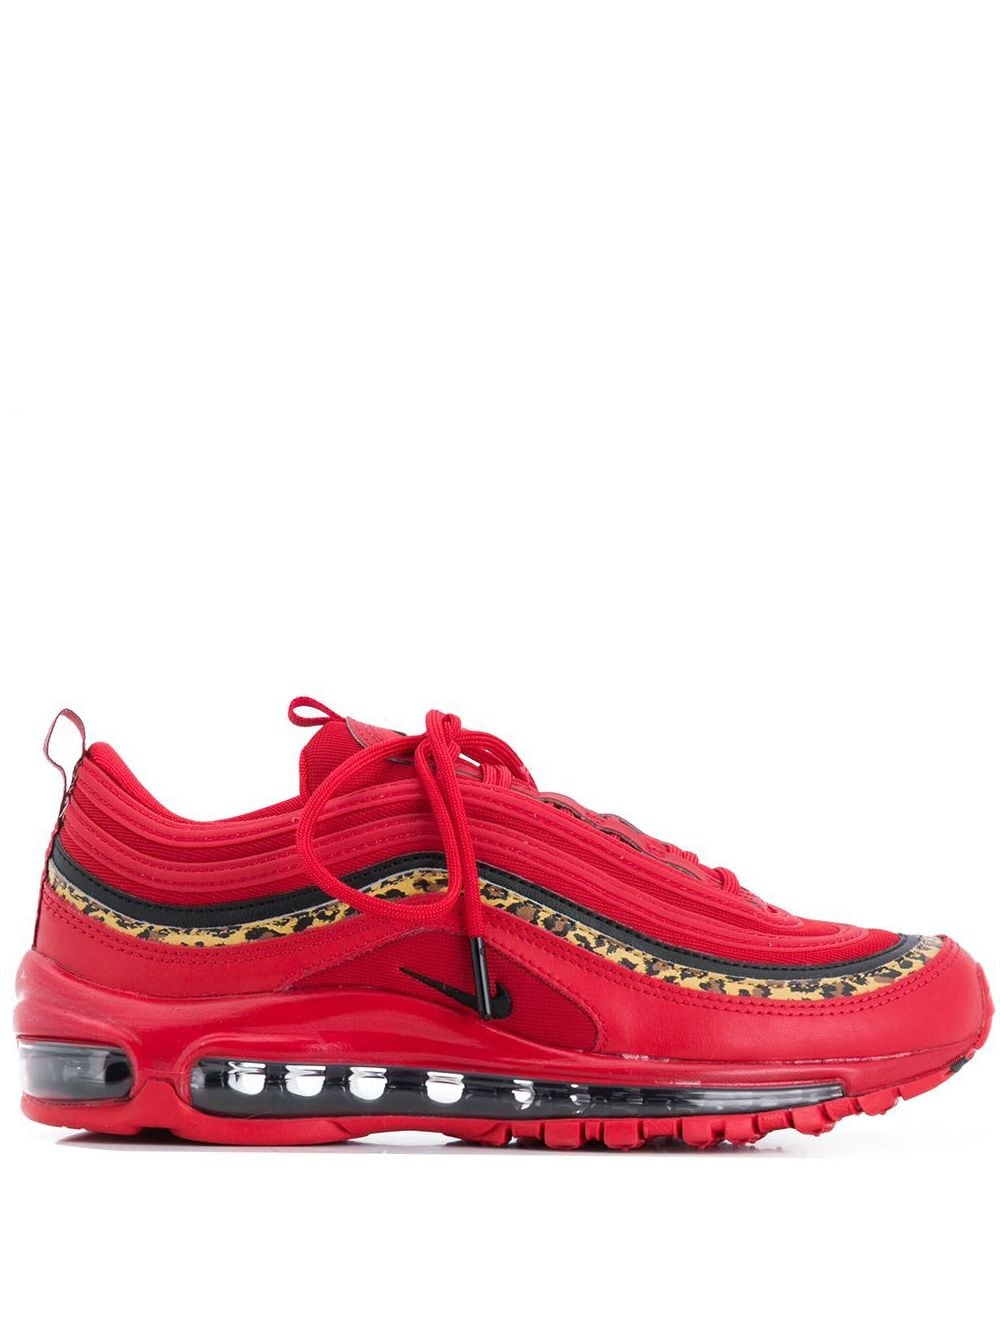 Nike Air Max 97 "Leopard Pack - Red" sneakers von Nike